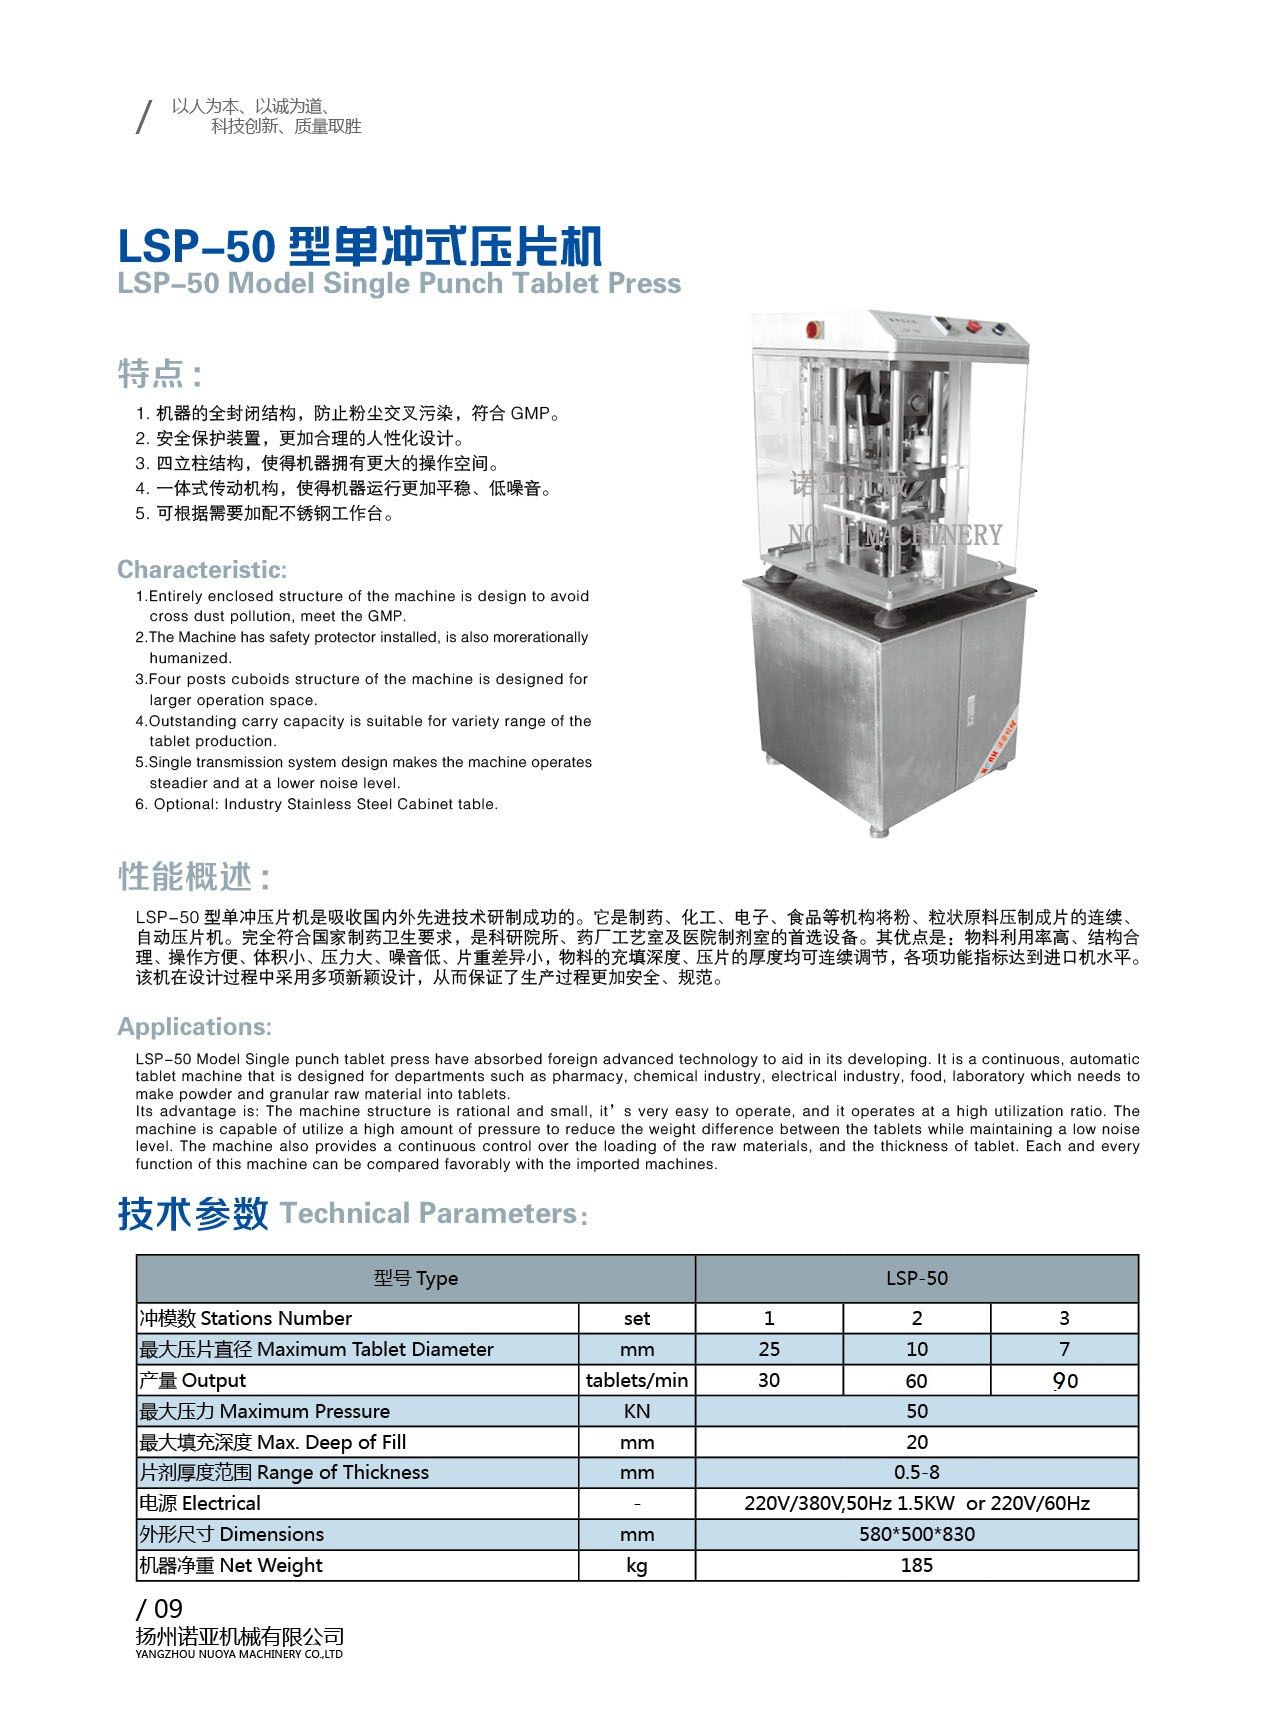 LSP-50 Single Punch Tablet Press